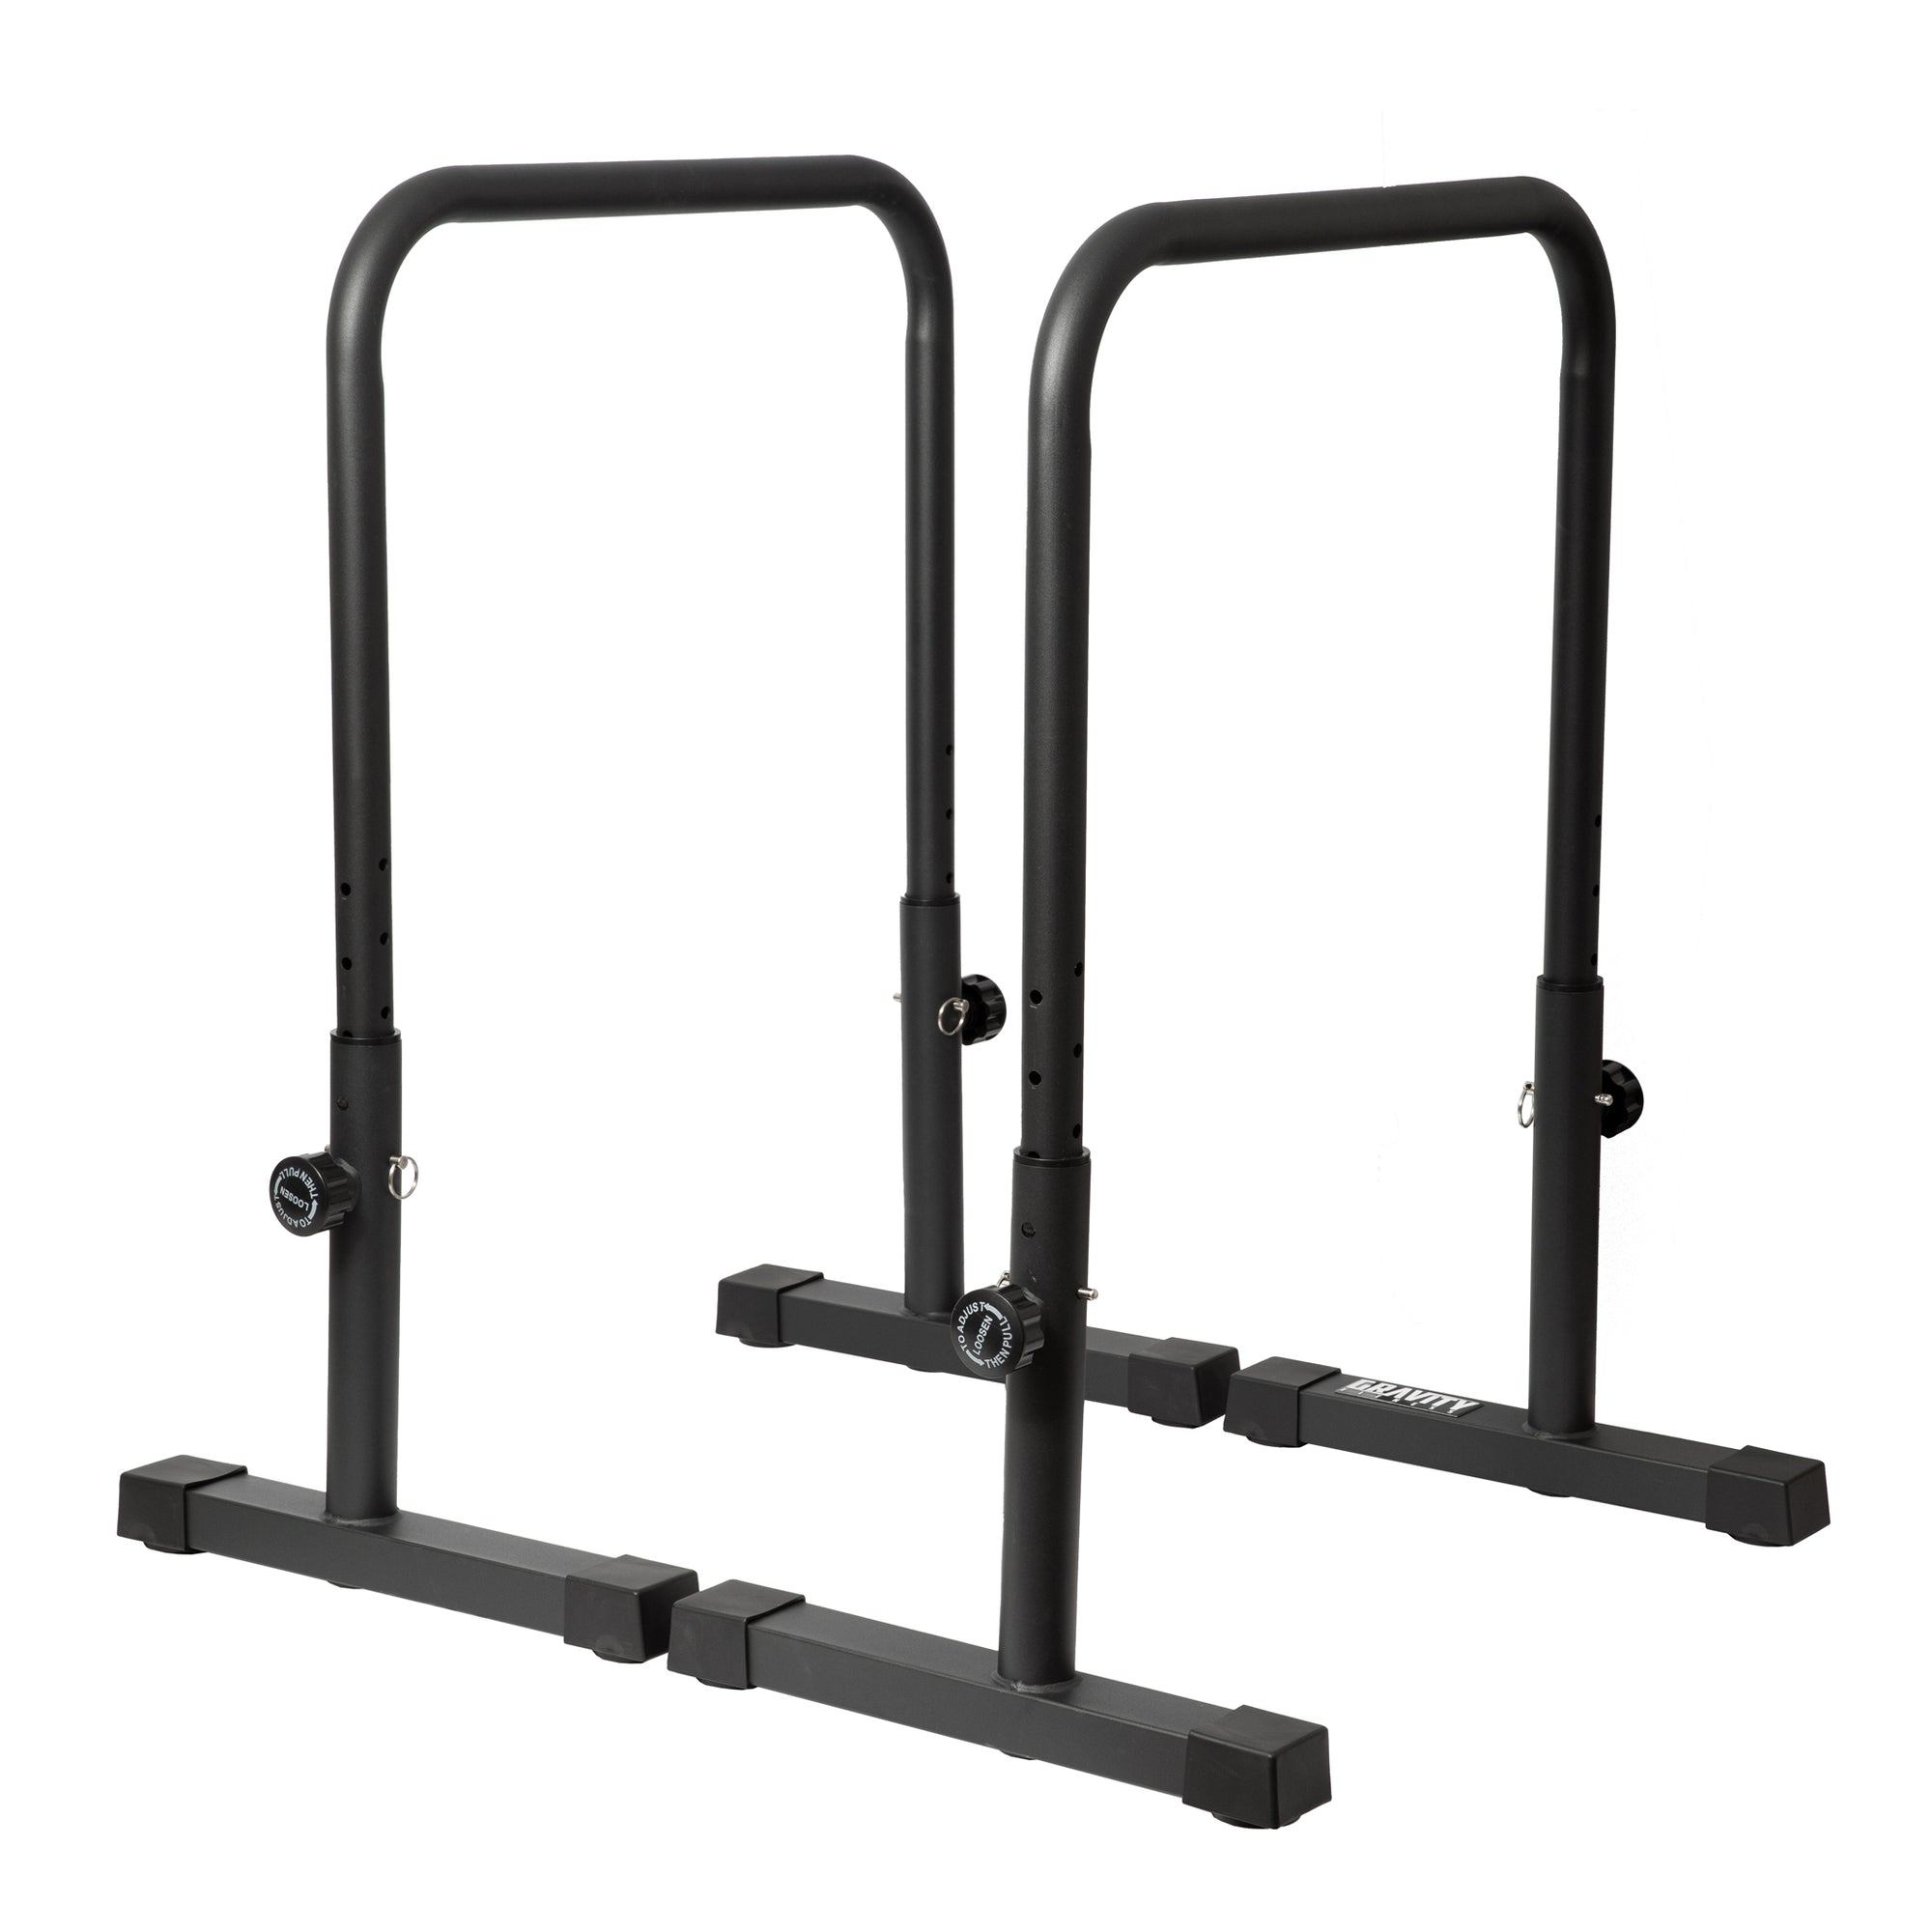 Gravity Fitness XL Adjustable Parallettes / Dips bars